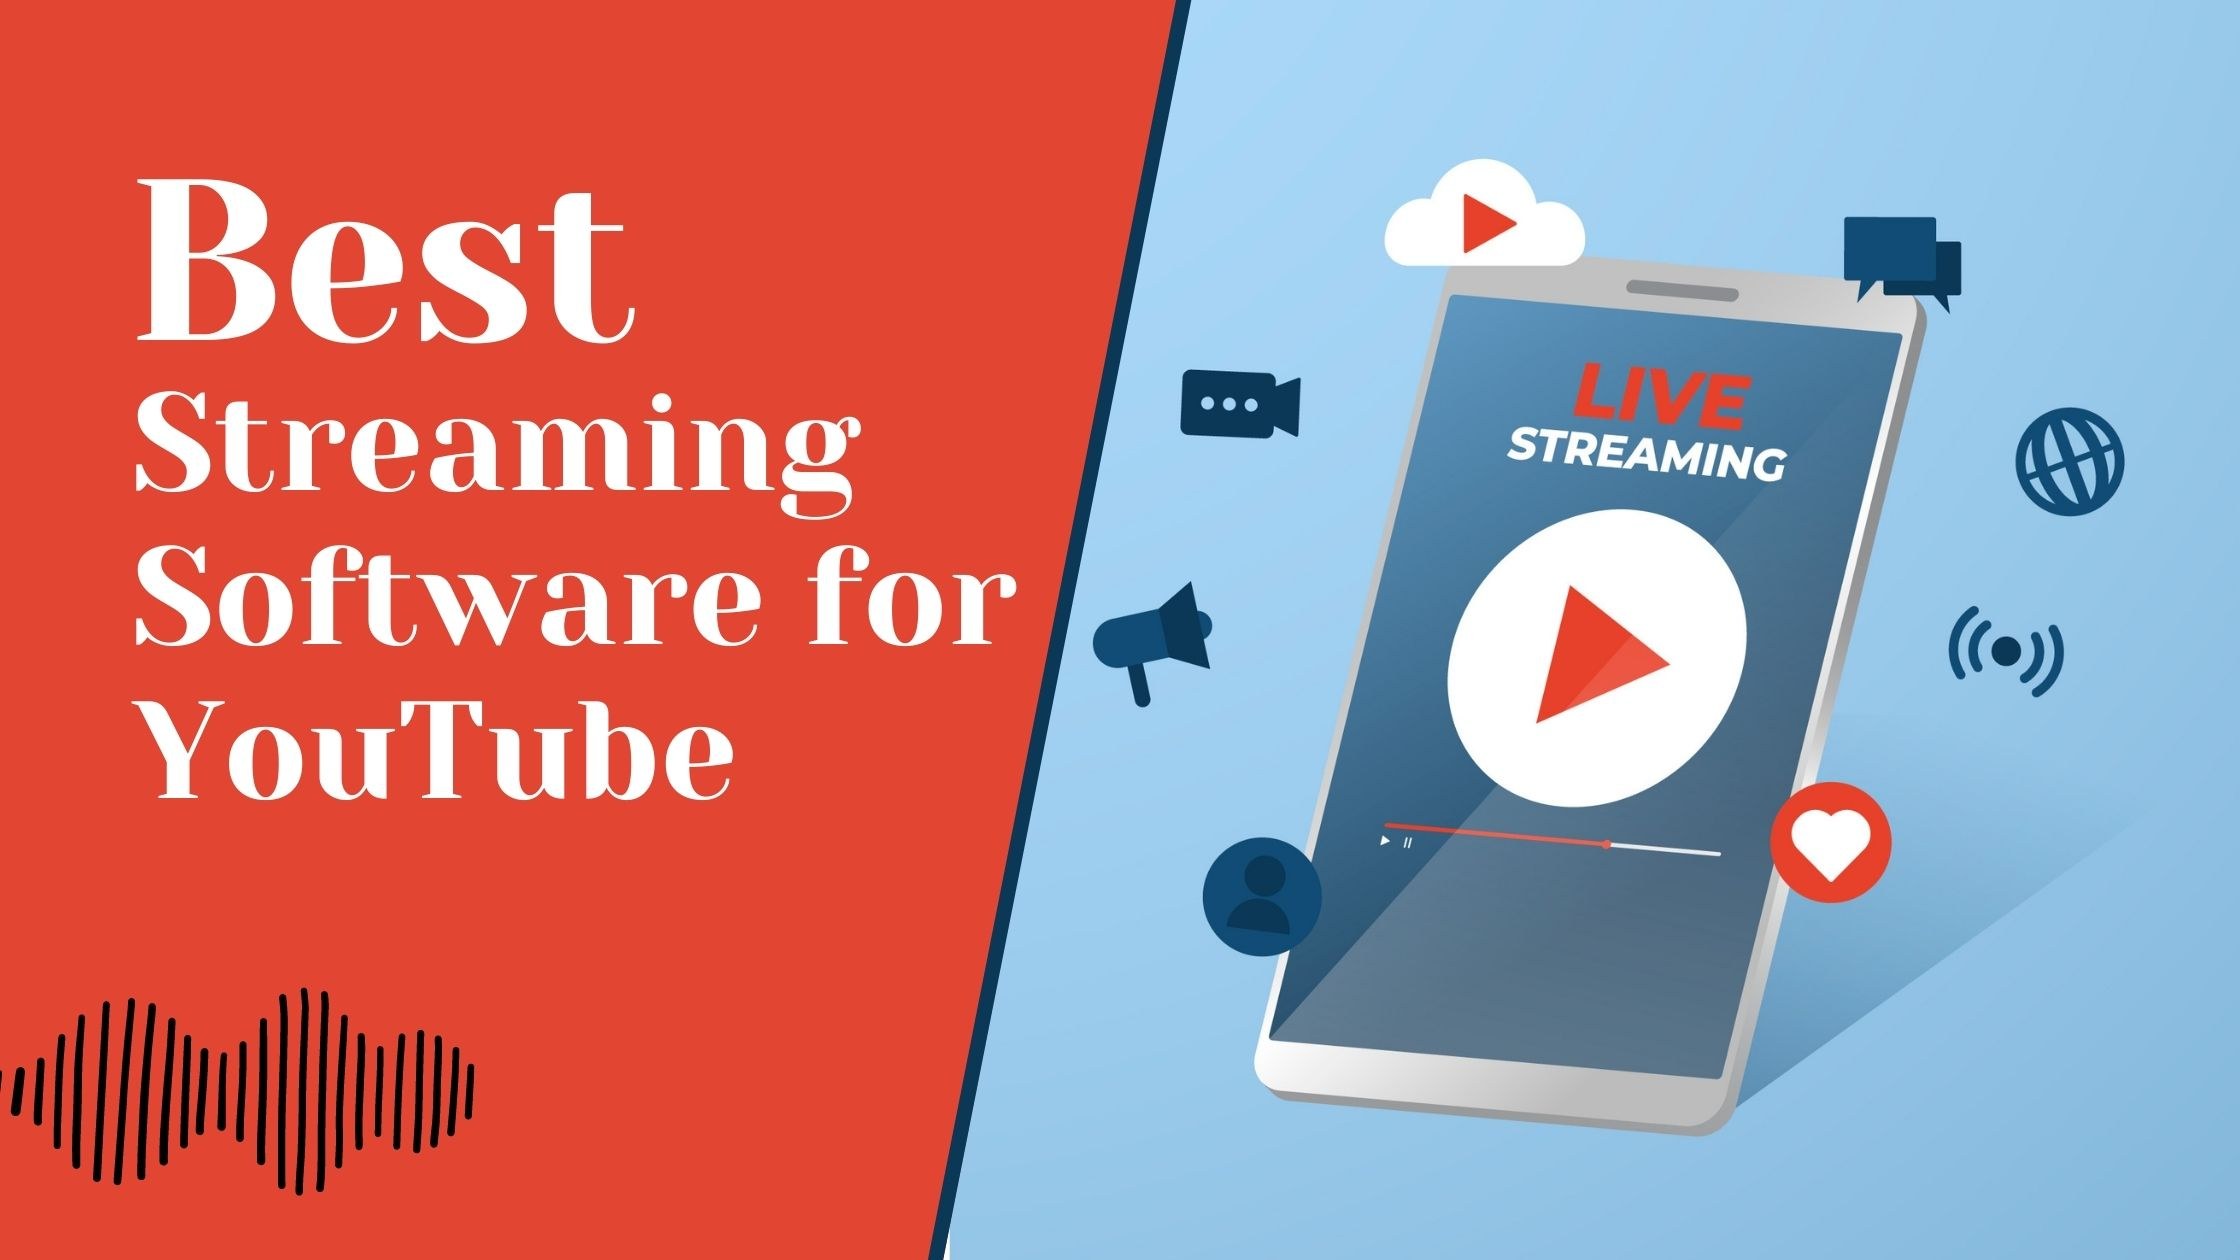 Best Streaming Software for YouTube